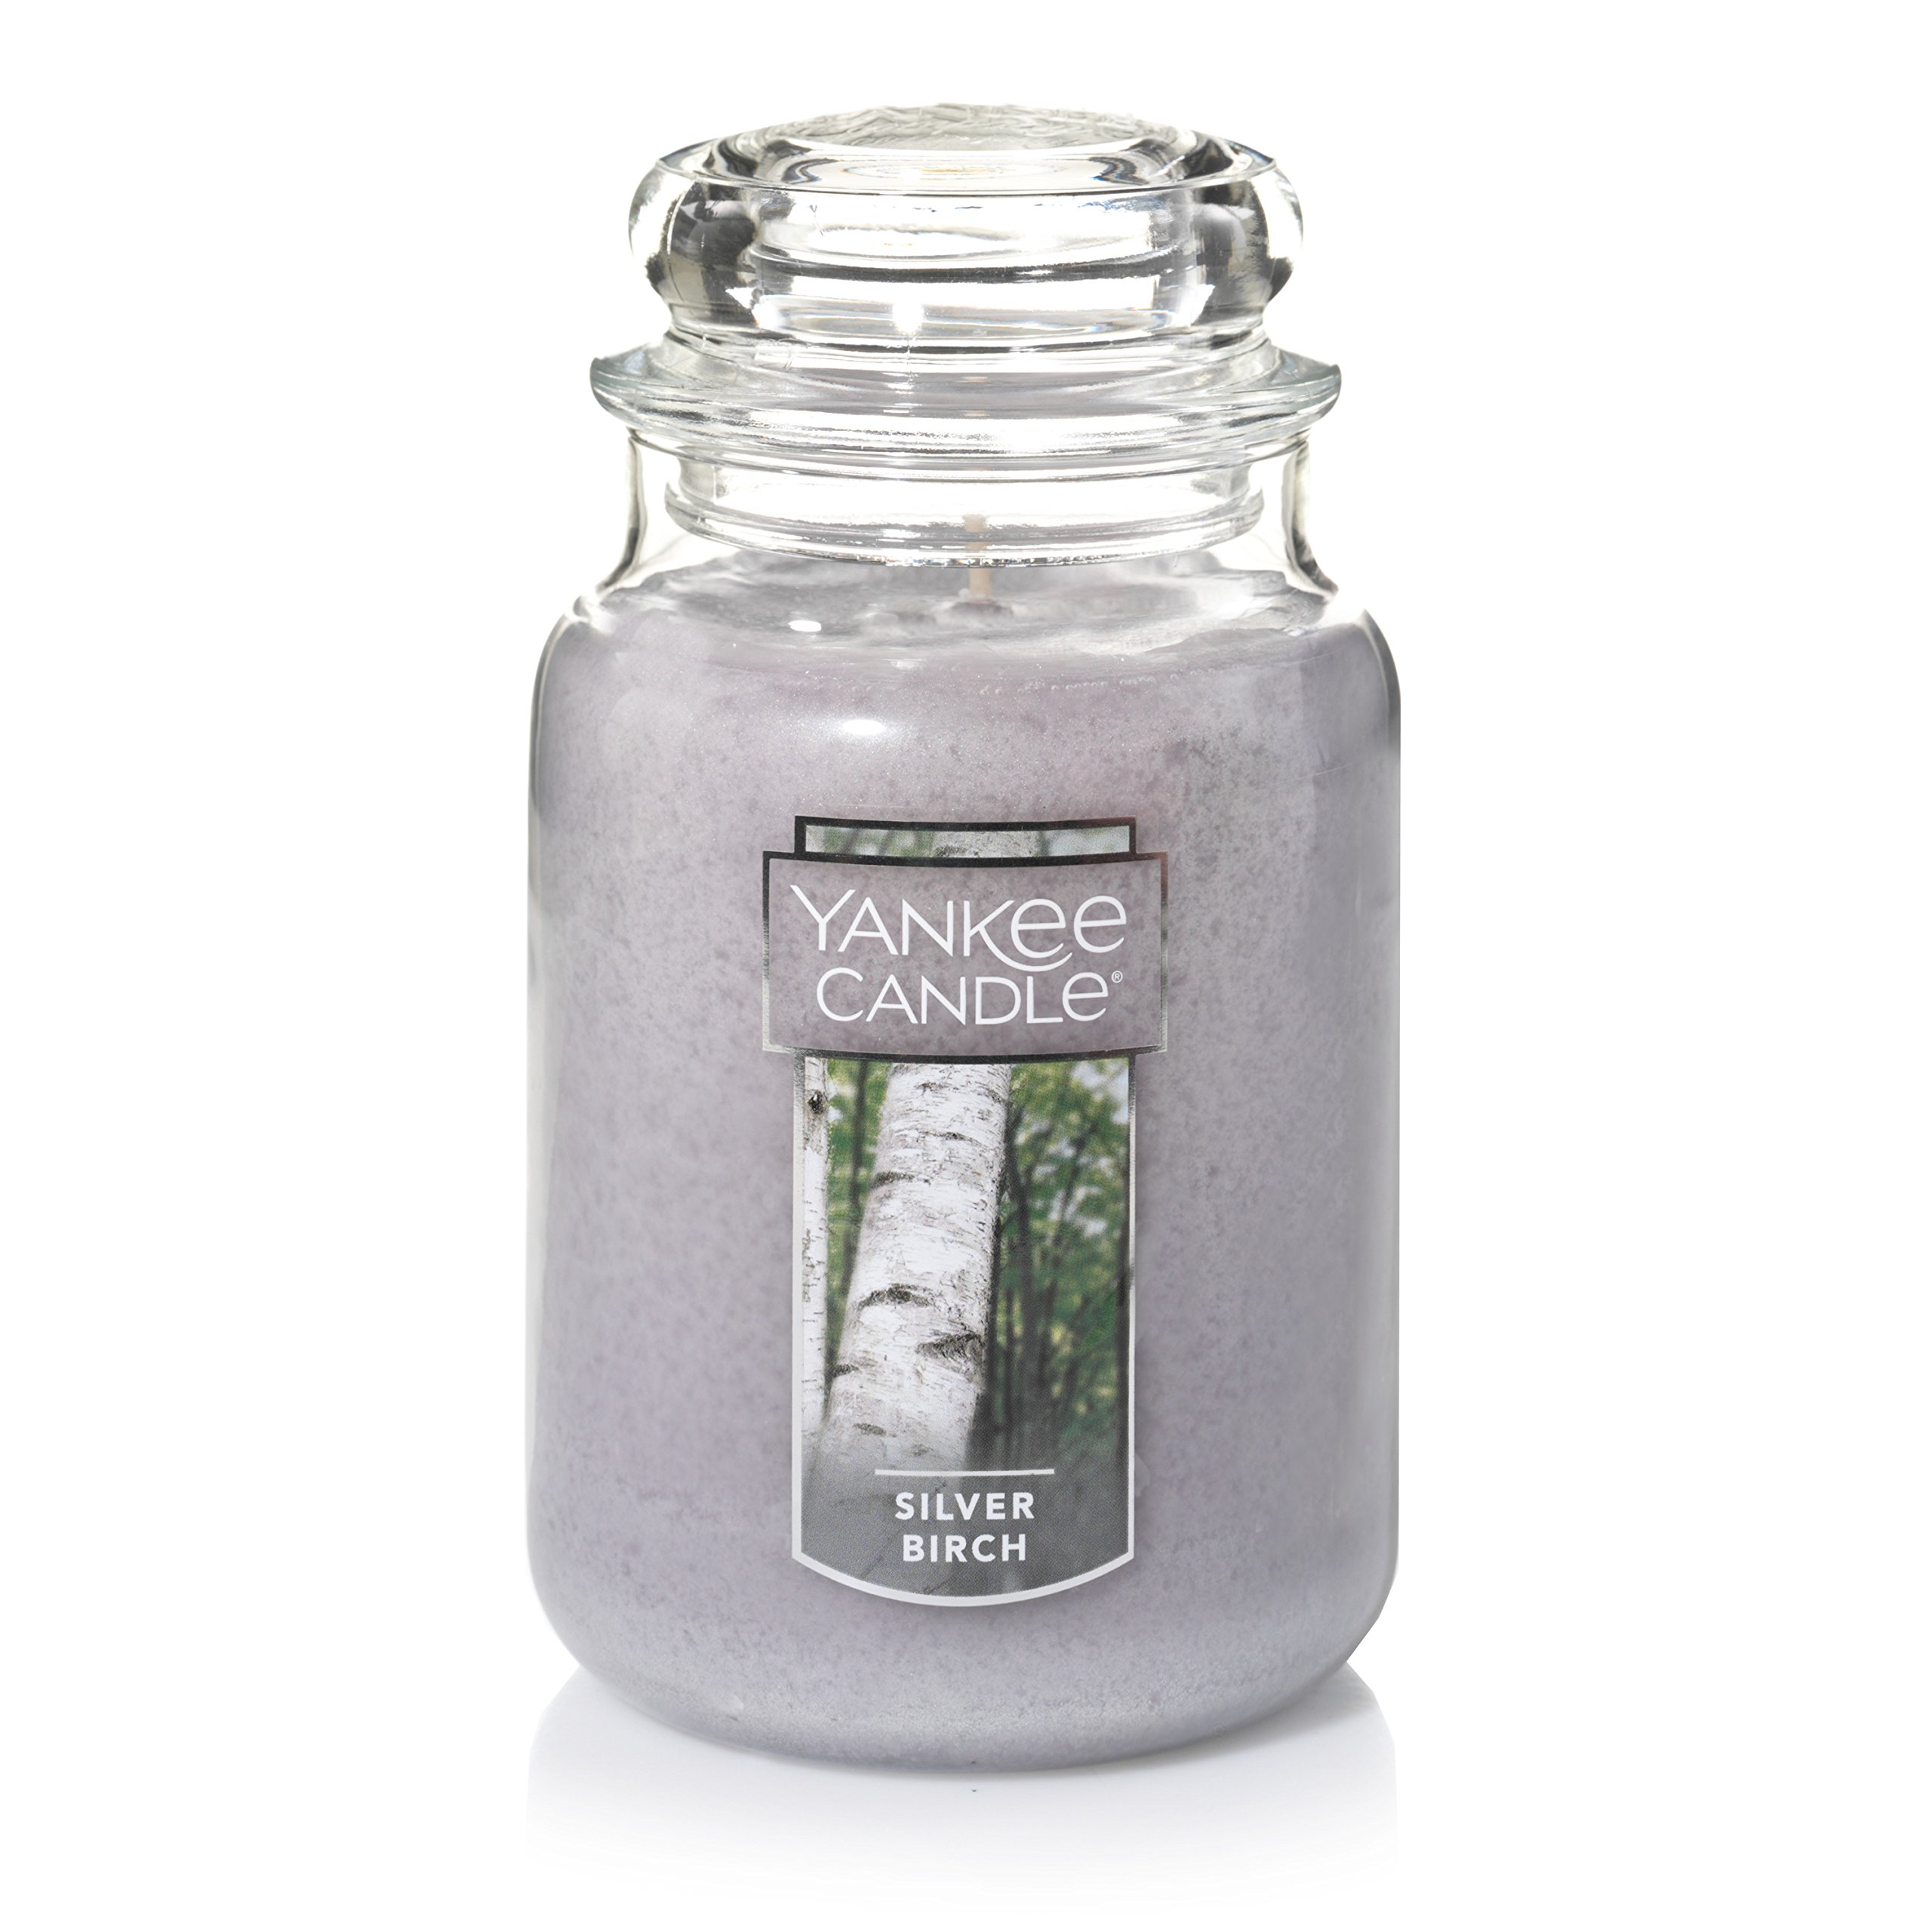  Yankee Candle Fluffy Towels Scented, Classic 22oz Large Jar  Single Wick Candle, Over 110 Hours of Burn Time